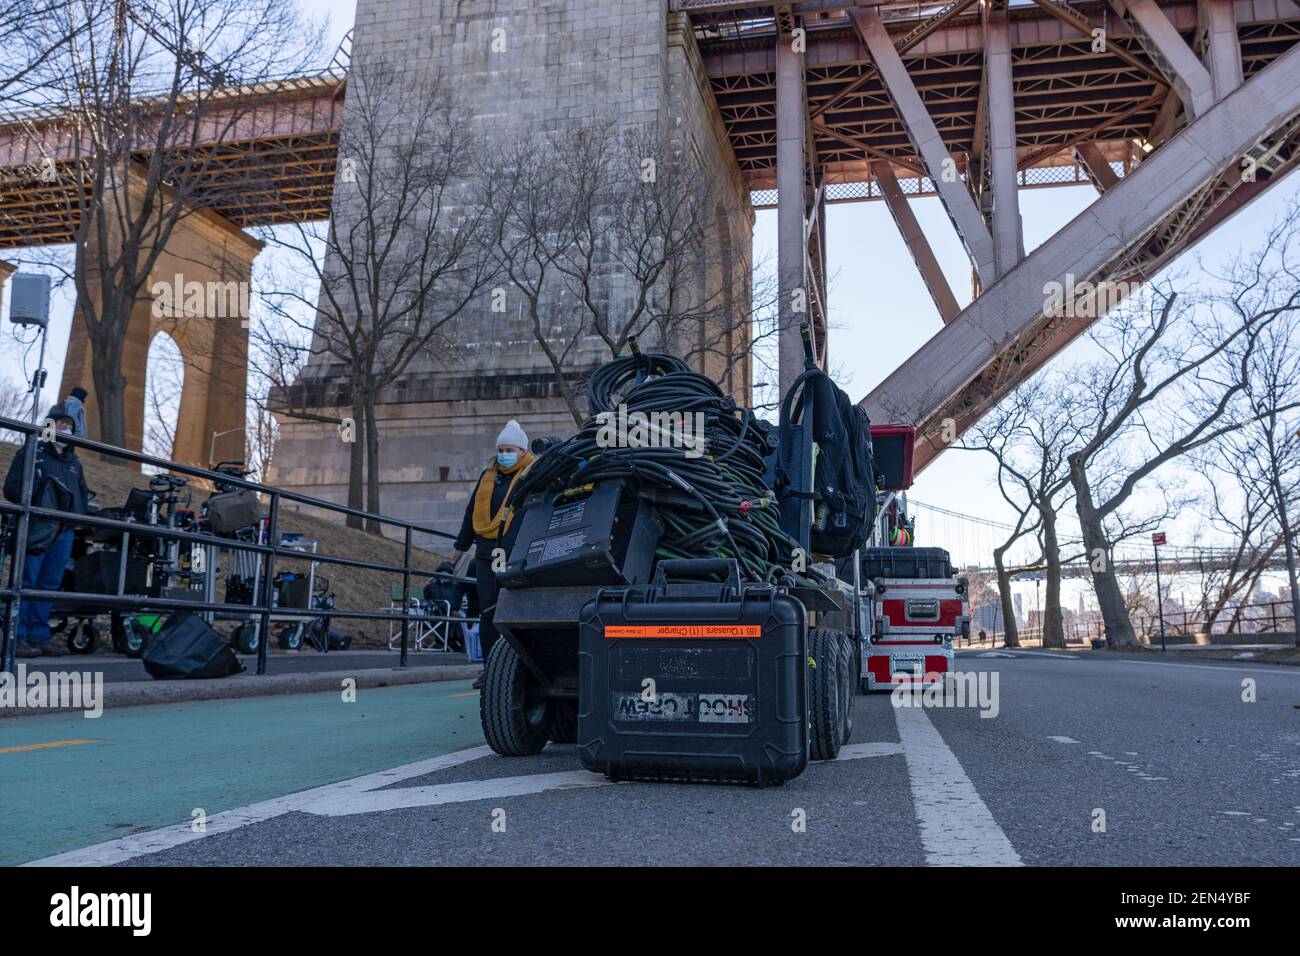 NEW YORK, NY – FEBRUARY 25: Crew and electric equipment seen during the filming of the television show 'Blue Bloods' season eleven in Astoria Park on February 25, 2021 in New York City. Credit: Ron Adar/Alamy Live News Stock Photo